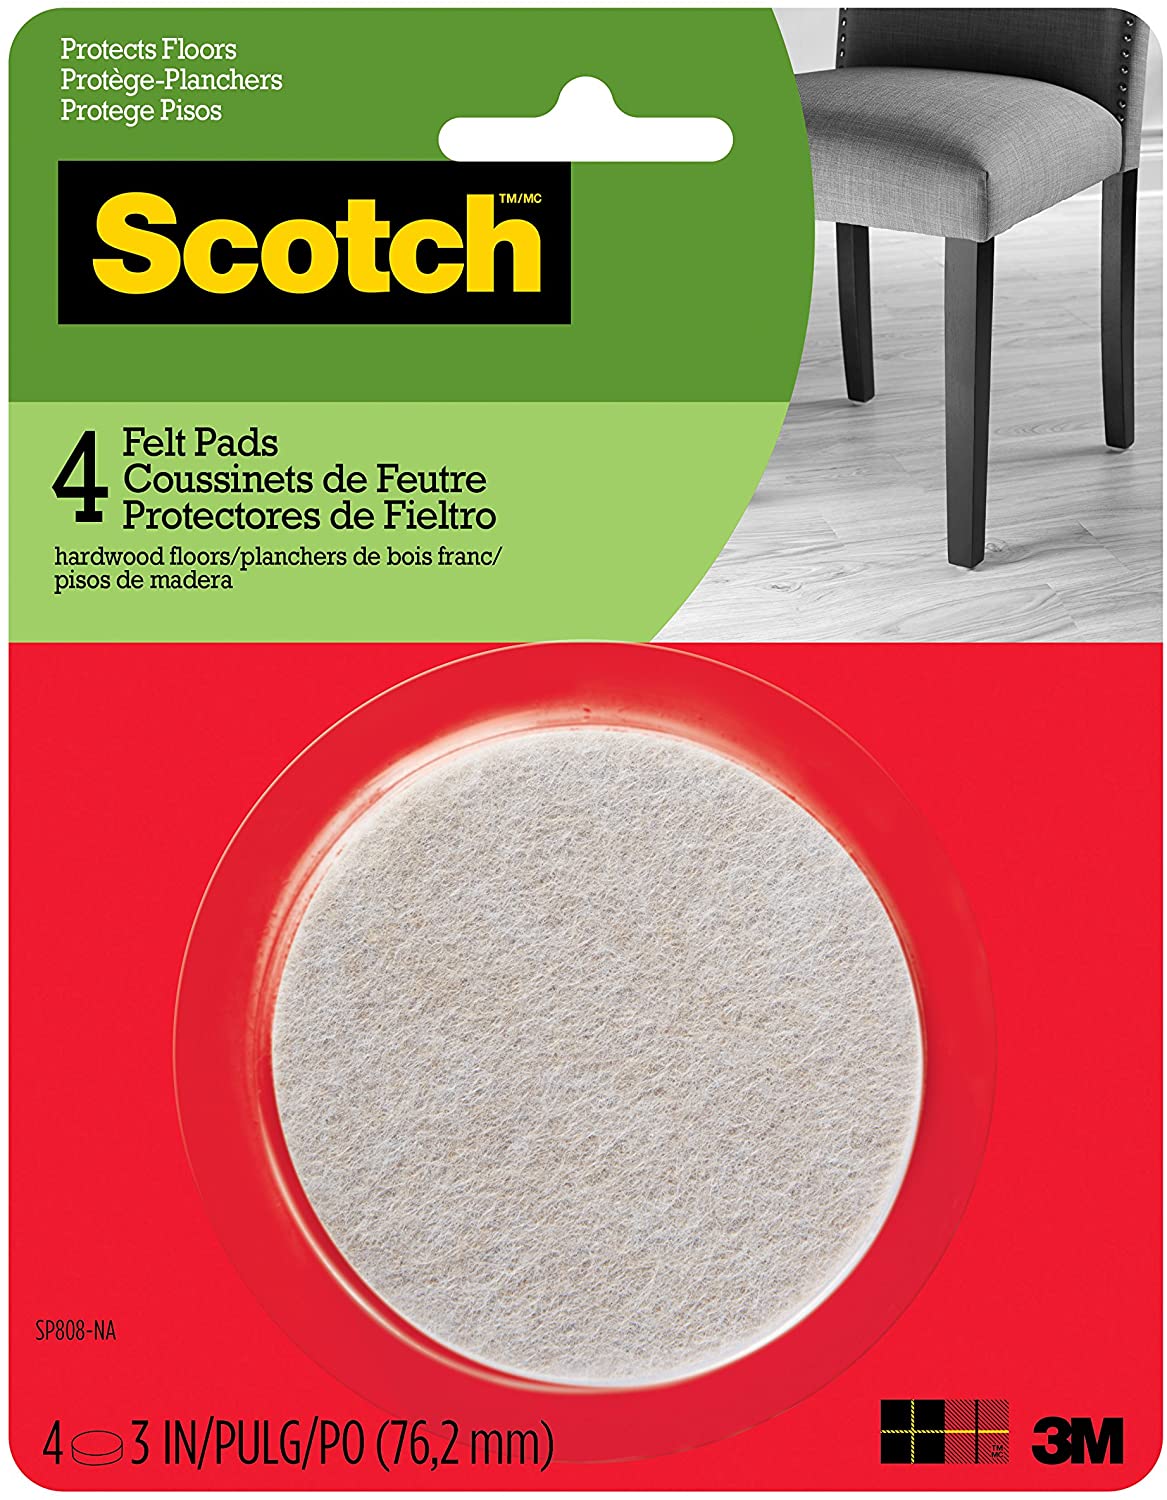 Scotch Felt Pads Round, 3 inch Diameter, 4 pcs Beige Fastening and Surface Protection Protects floors